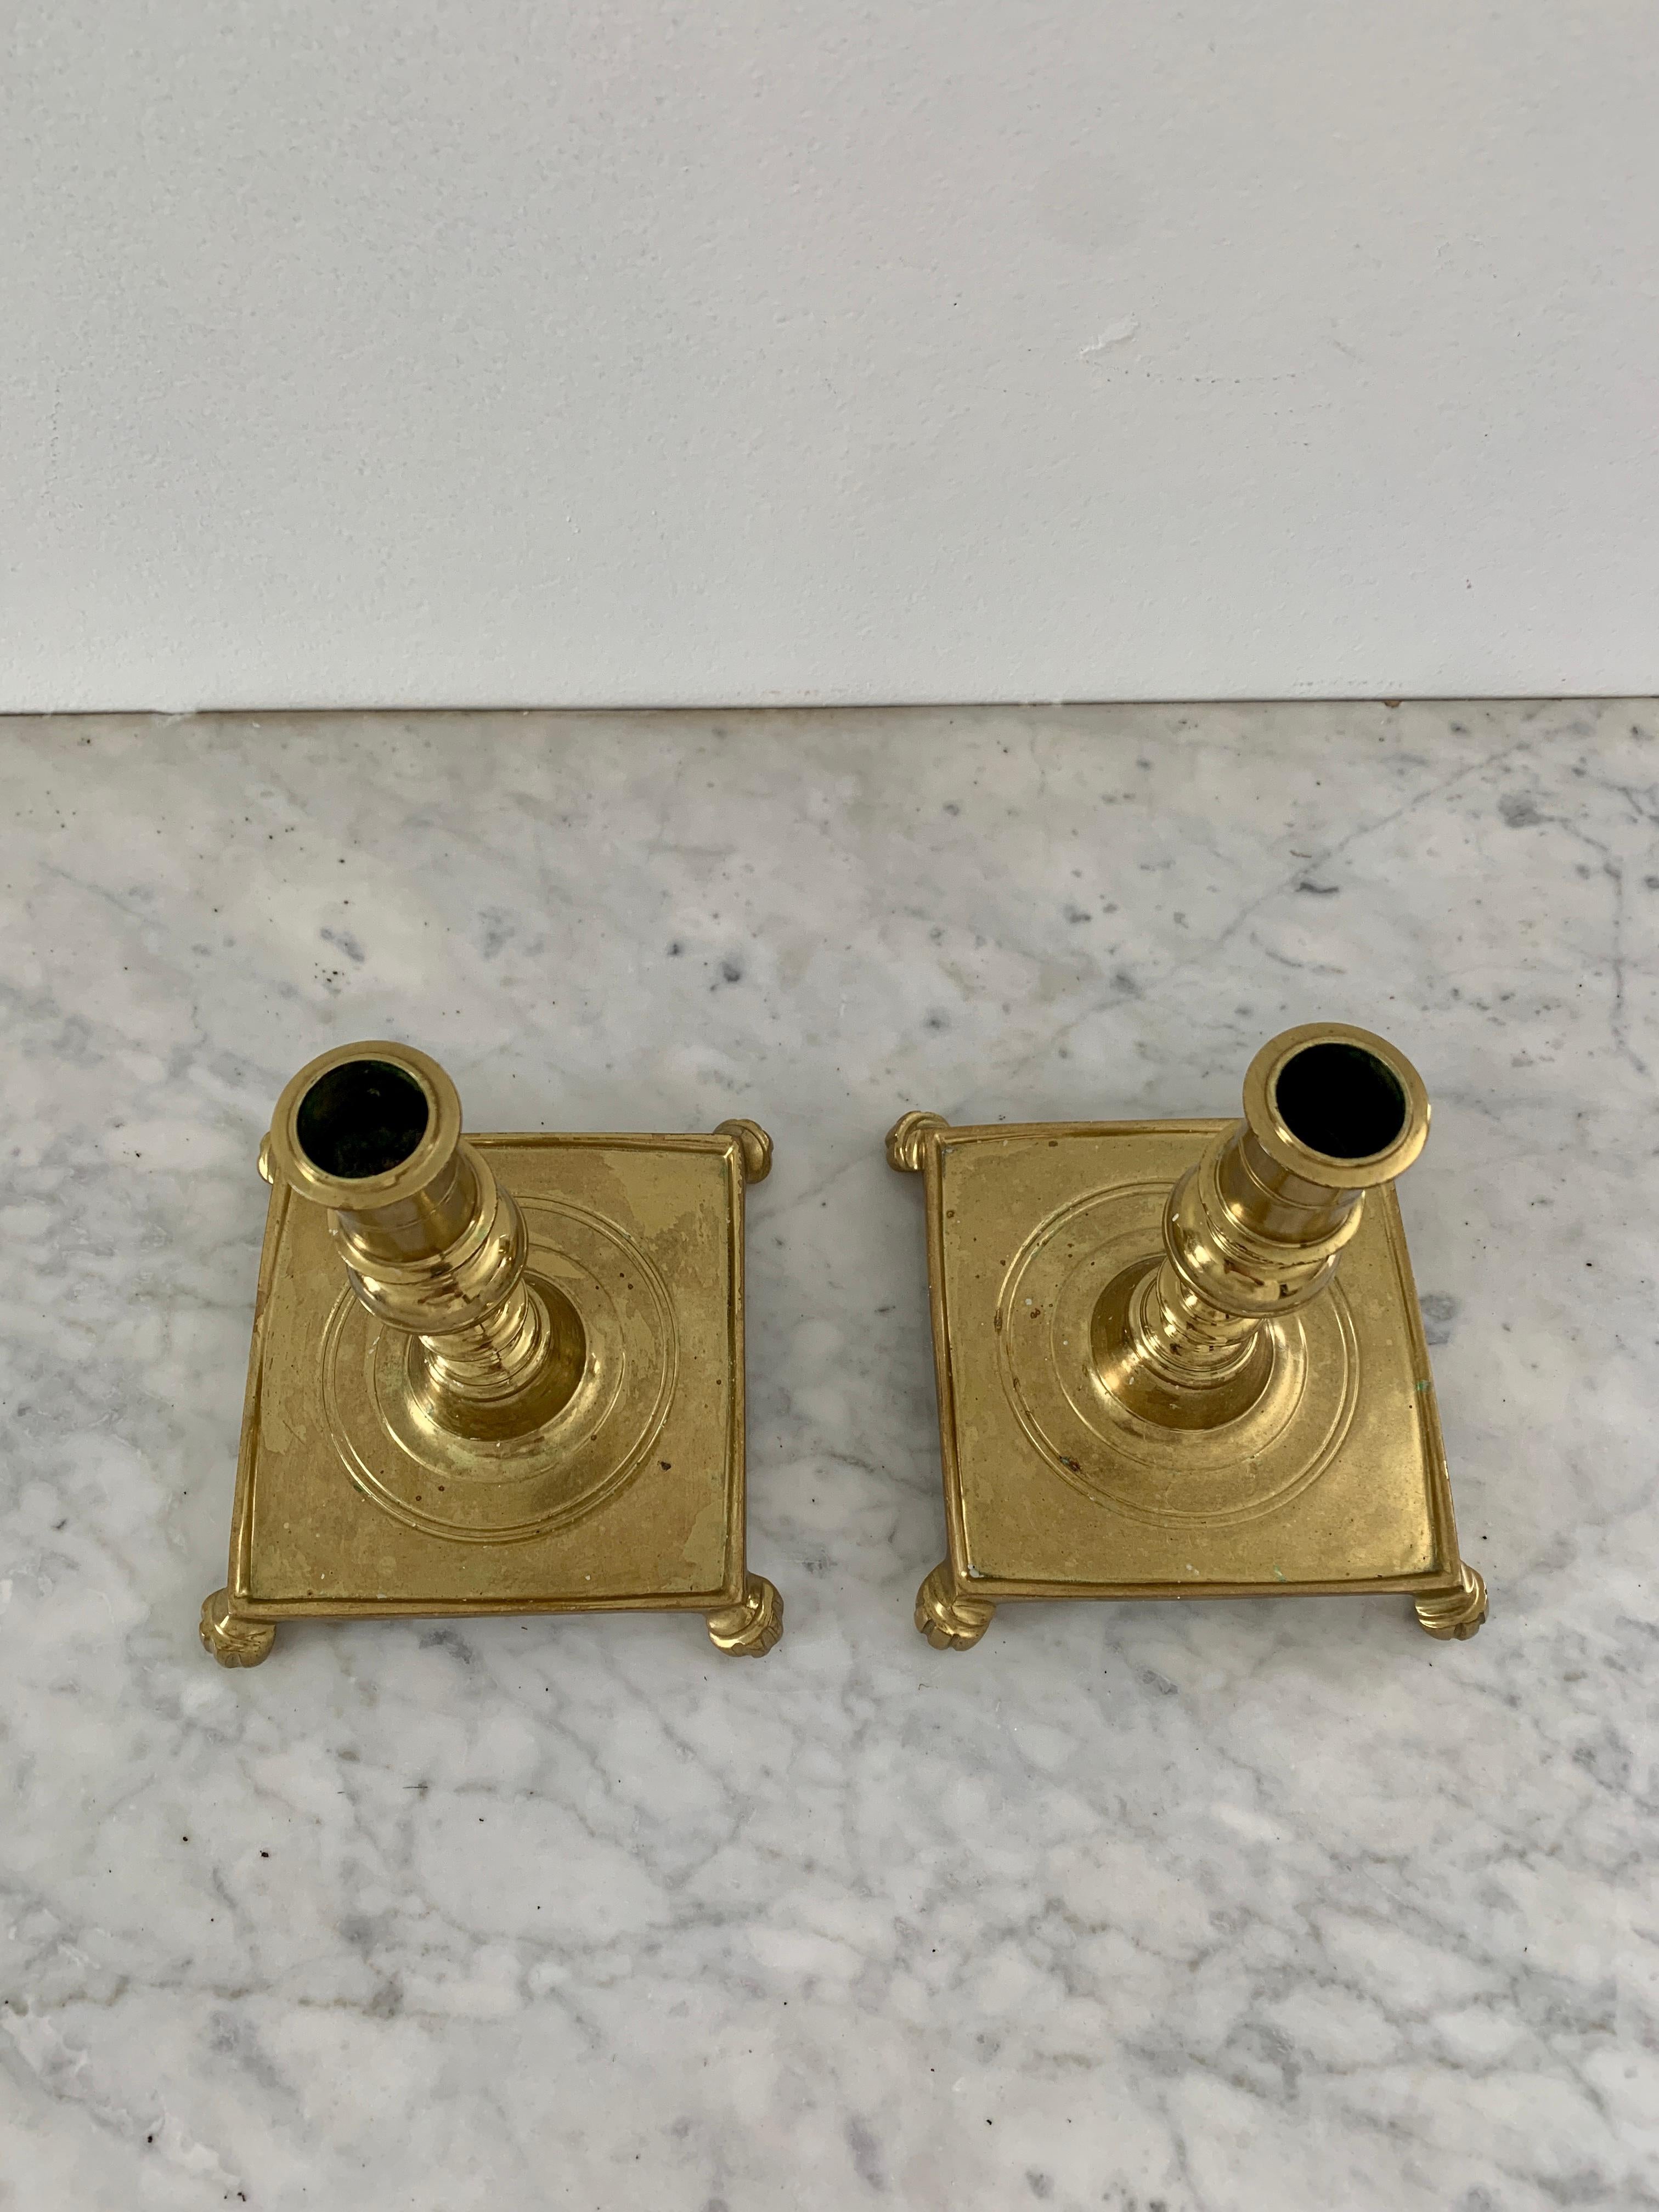 British Colonial Brass Candle Holders with Paw Feet, a Pair